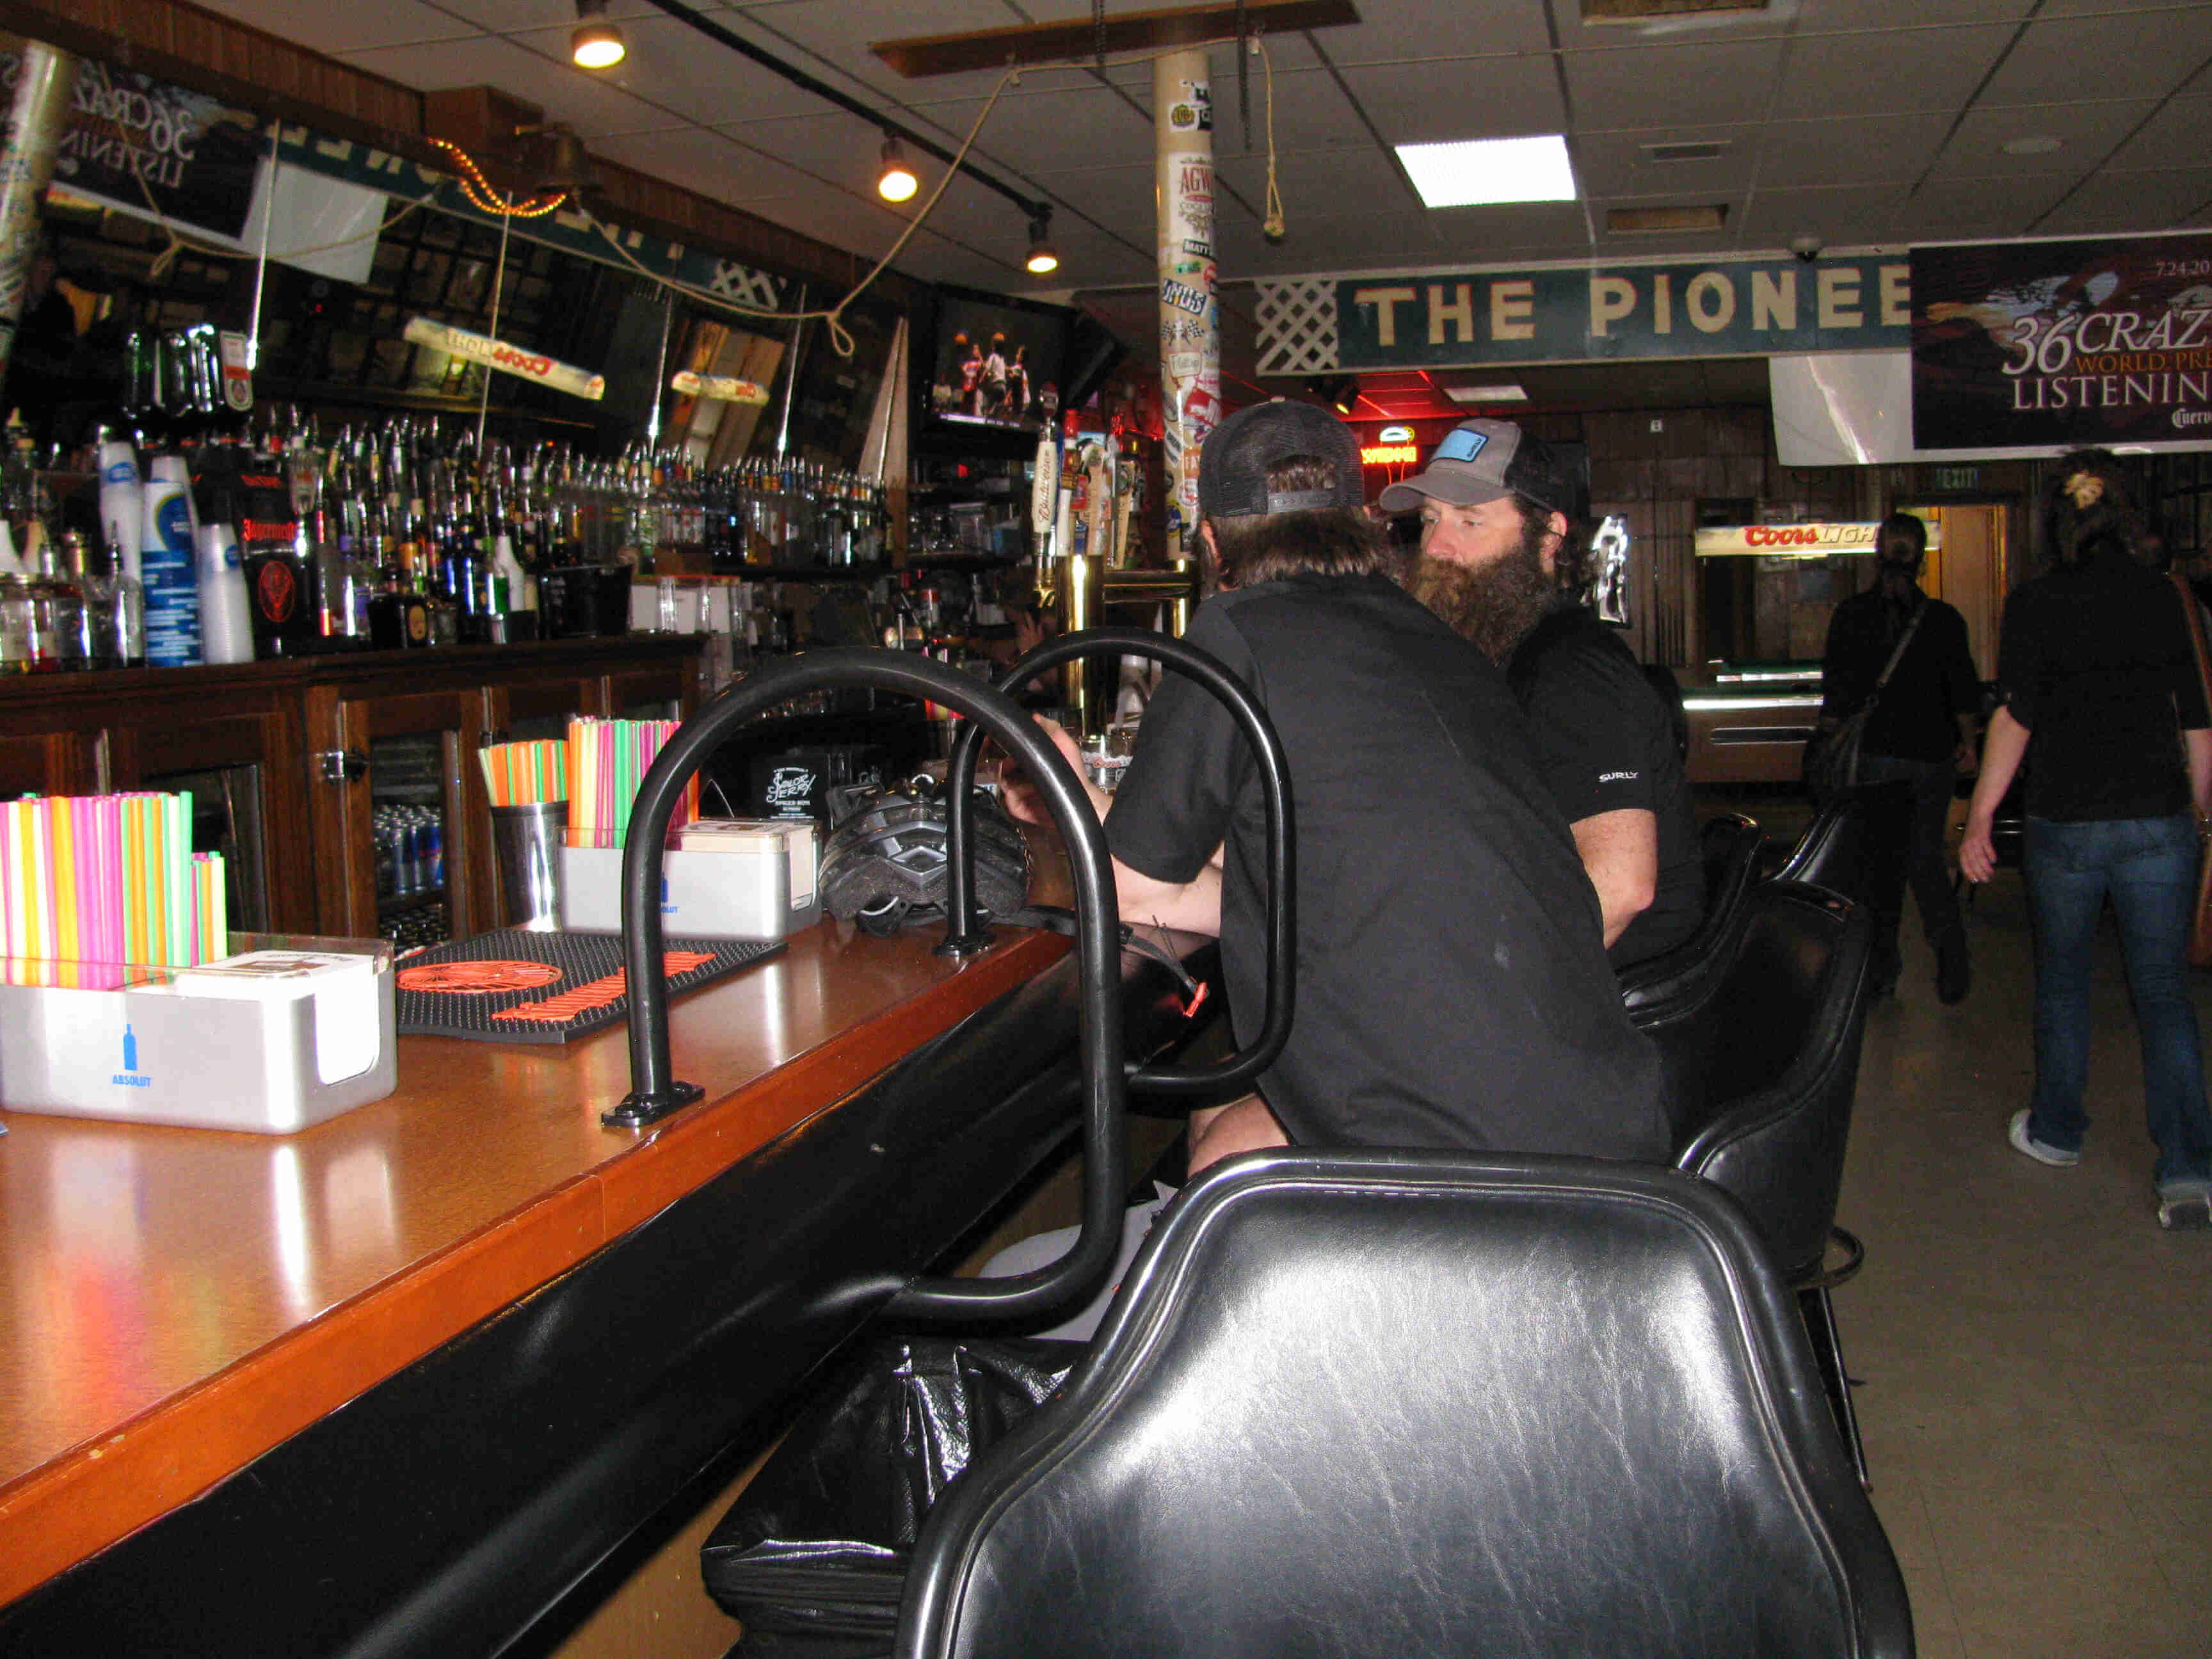 Side view of 2 people, sitting belly up to the countertop and talking, inside a bar